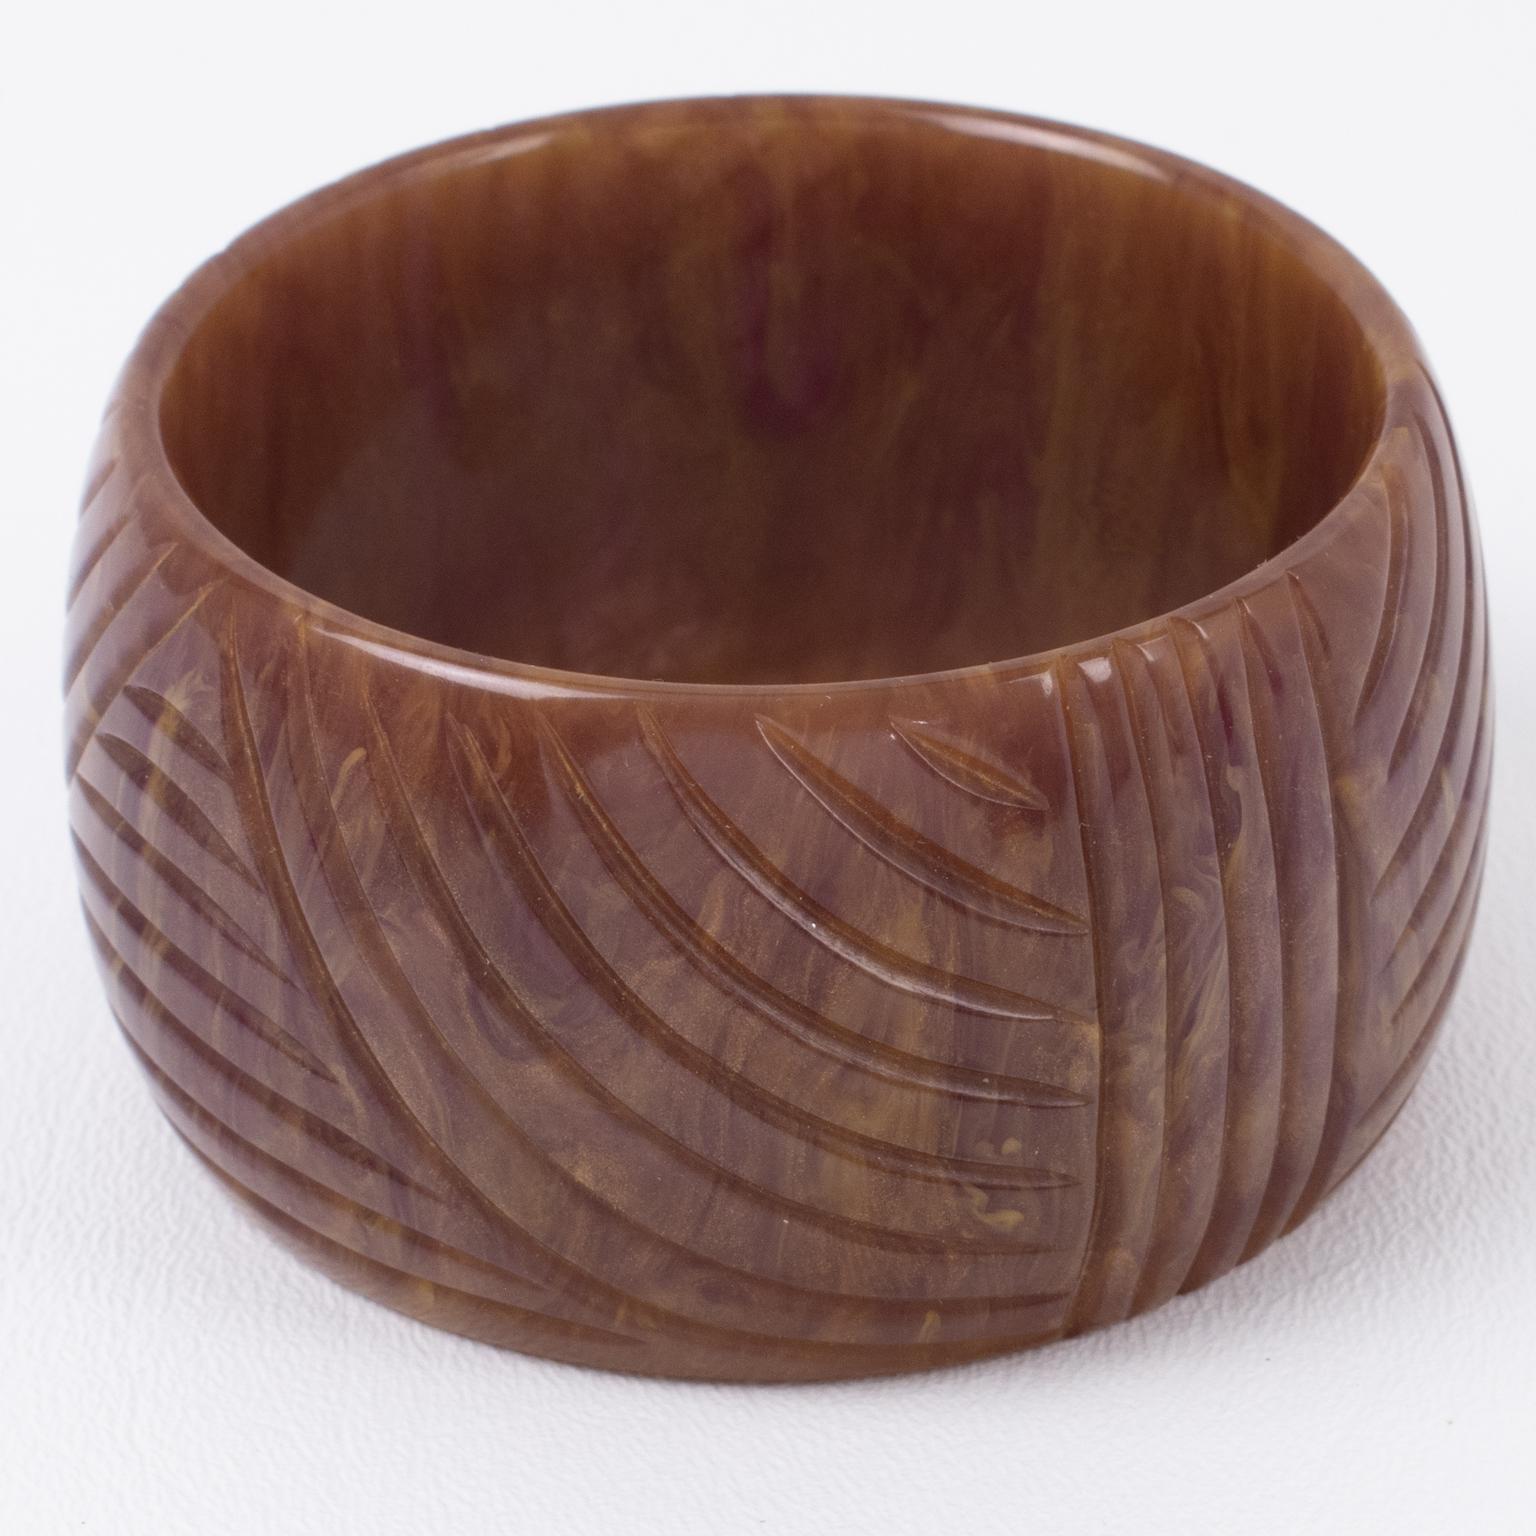 This is a spectacular purple stardust marble Bakelite carved bracelet bangle. It features a chunky oversized domed shape with a geometric carving design. The color is an intense purple with milky swirling and gold dust inclusions. 
Measurements: